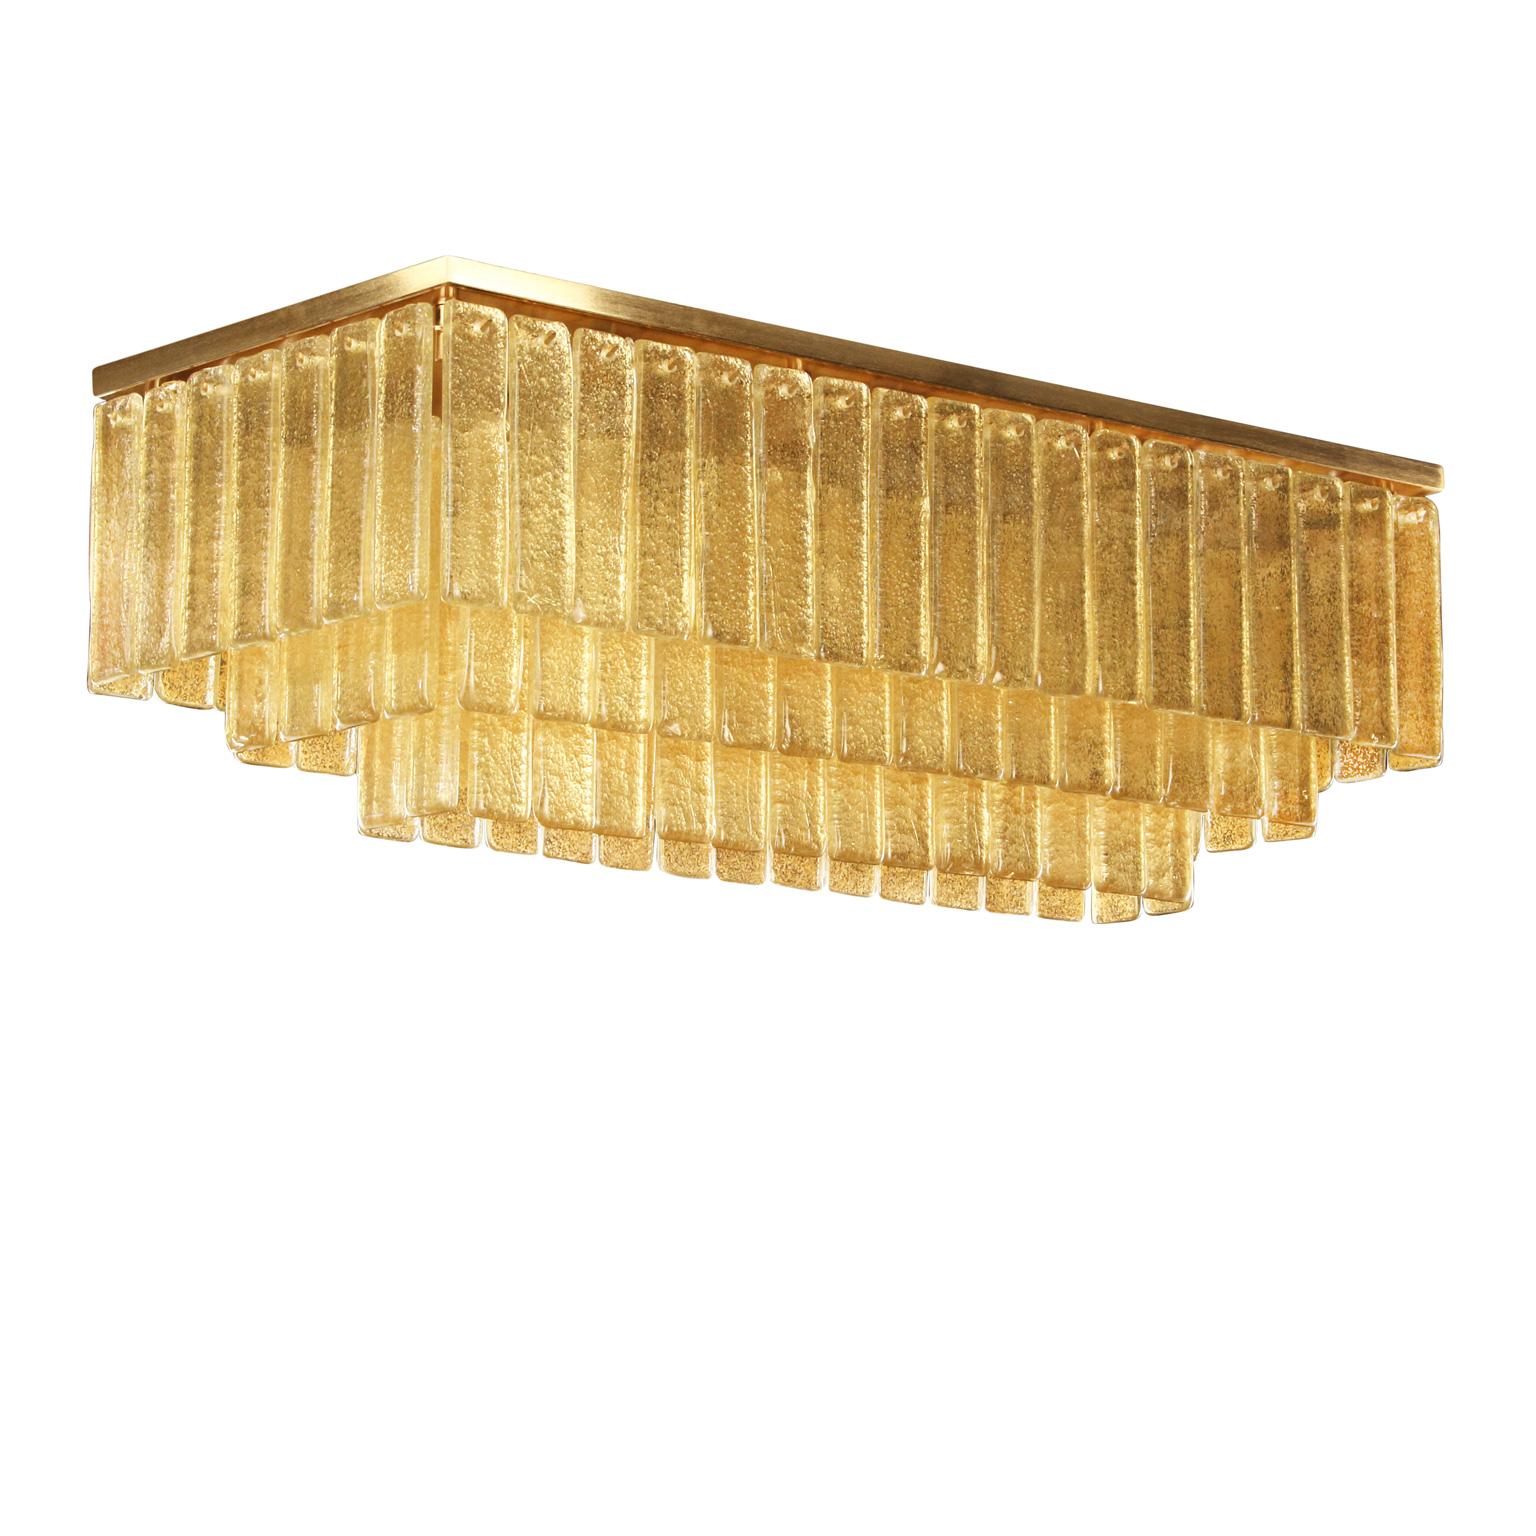 Ceiling lamp Gold Colour Murano Glass listels Brushed Gold Fixture by Multiforme